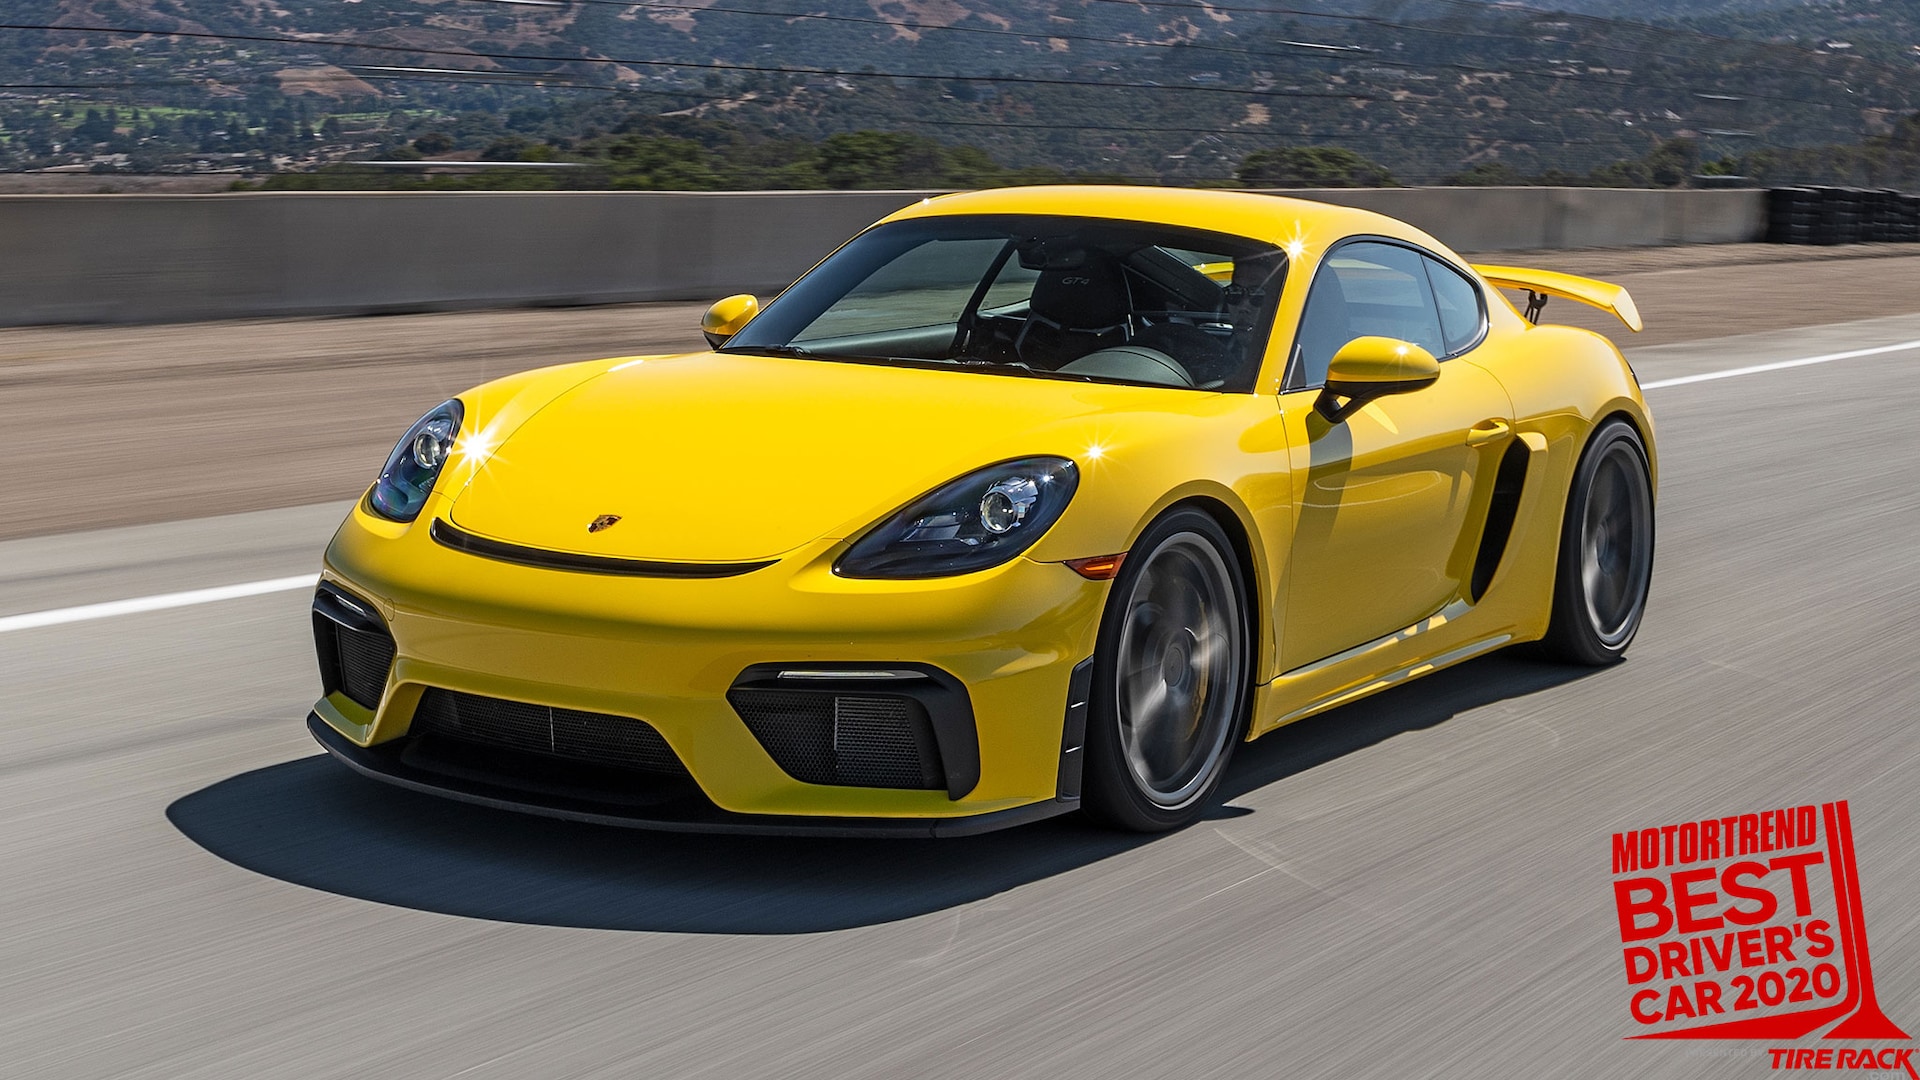 2020 Porsche 718 Cayman GT4 Pros and Cons Review: Ultimate Track Tool